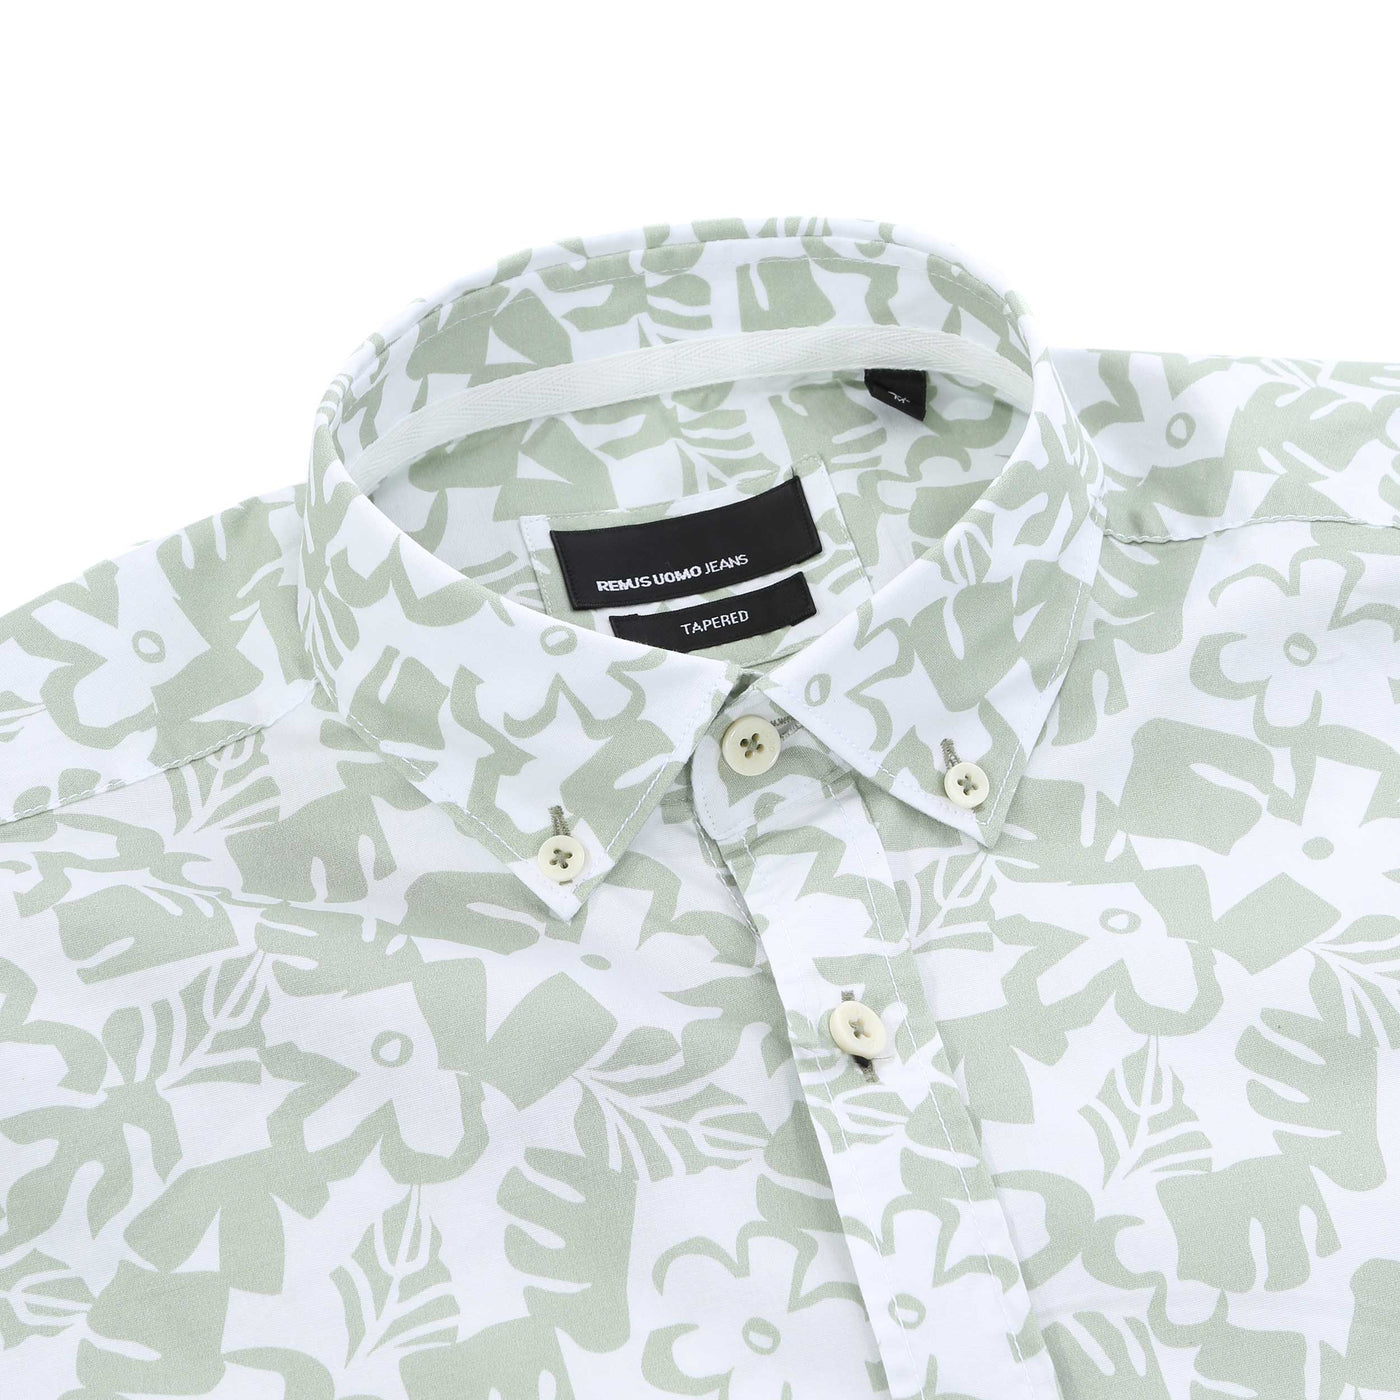 Remus Uomo Leaf Floral Print Short Sleeve Shirt in Mint White Collar